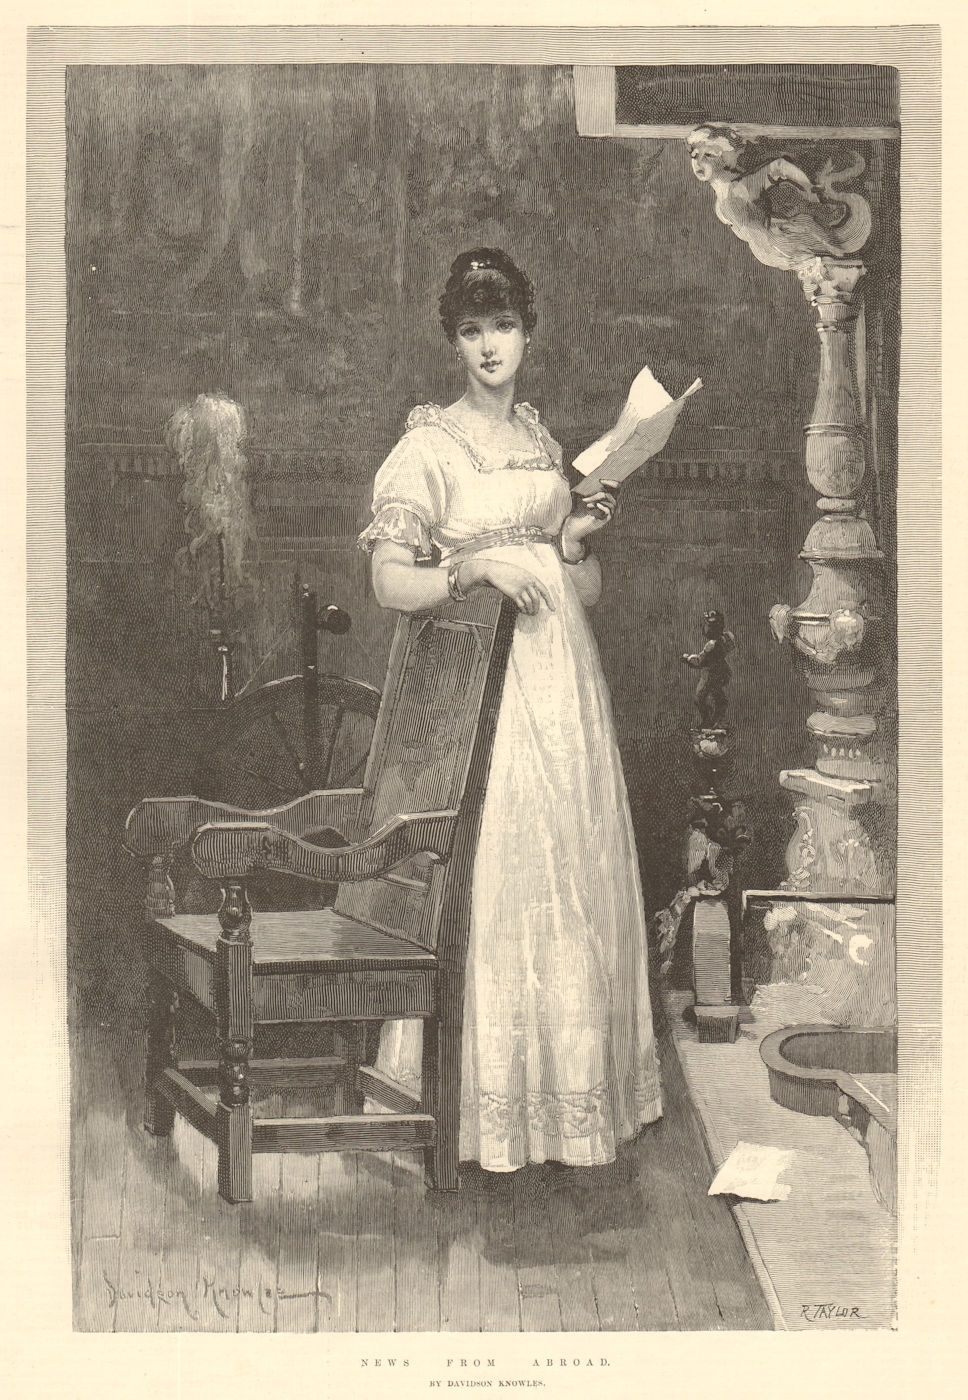 Associate Product "News from abroad", by Davidson Knowles. Pretty Ladies. Letters 1890 ILN print